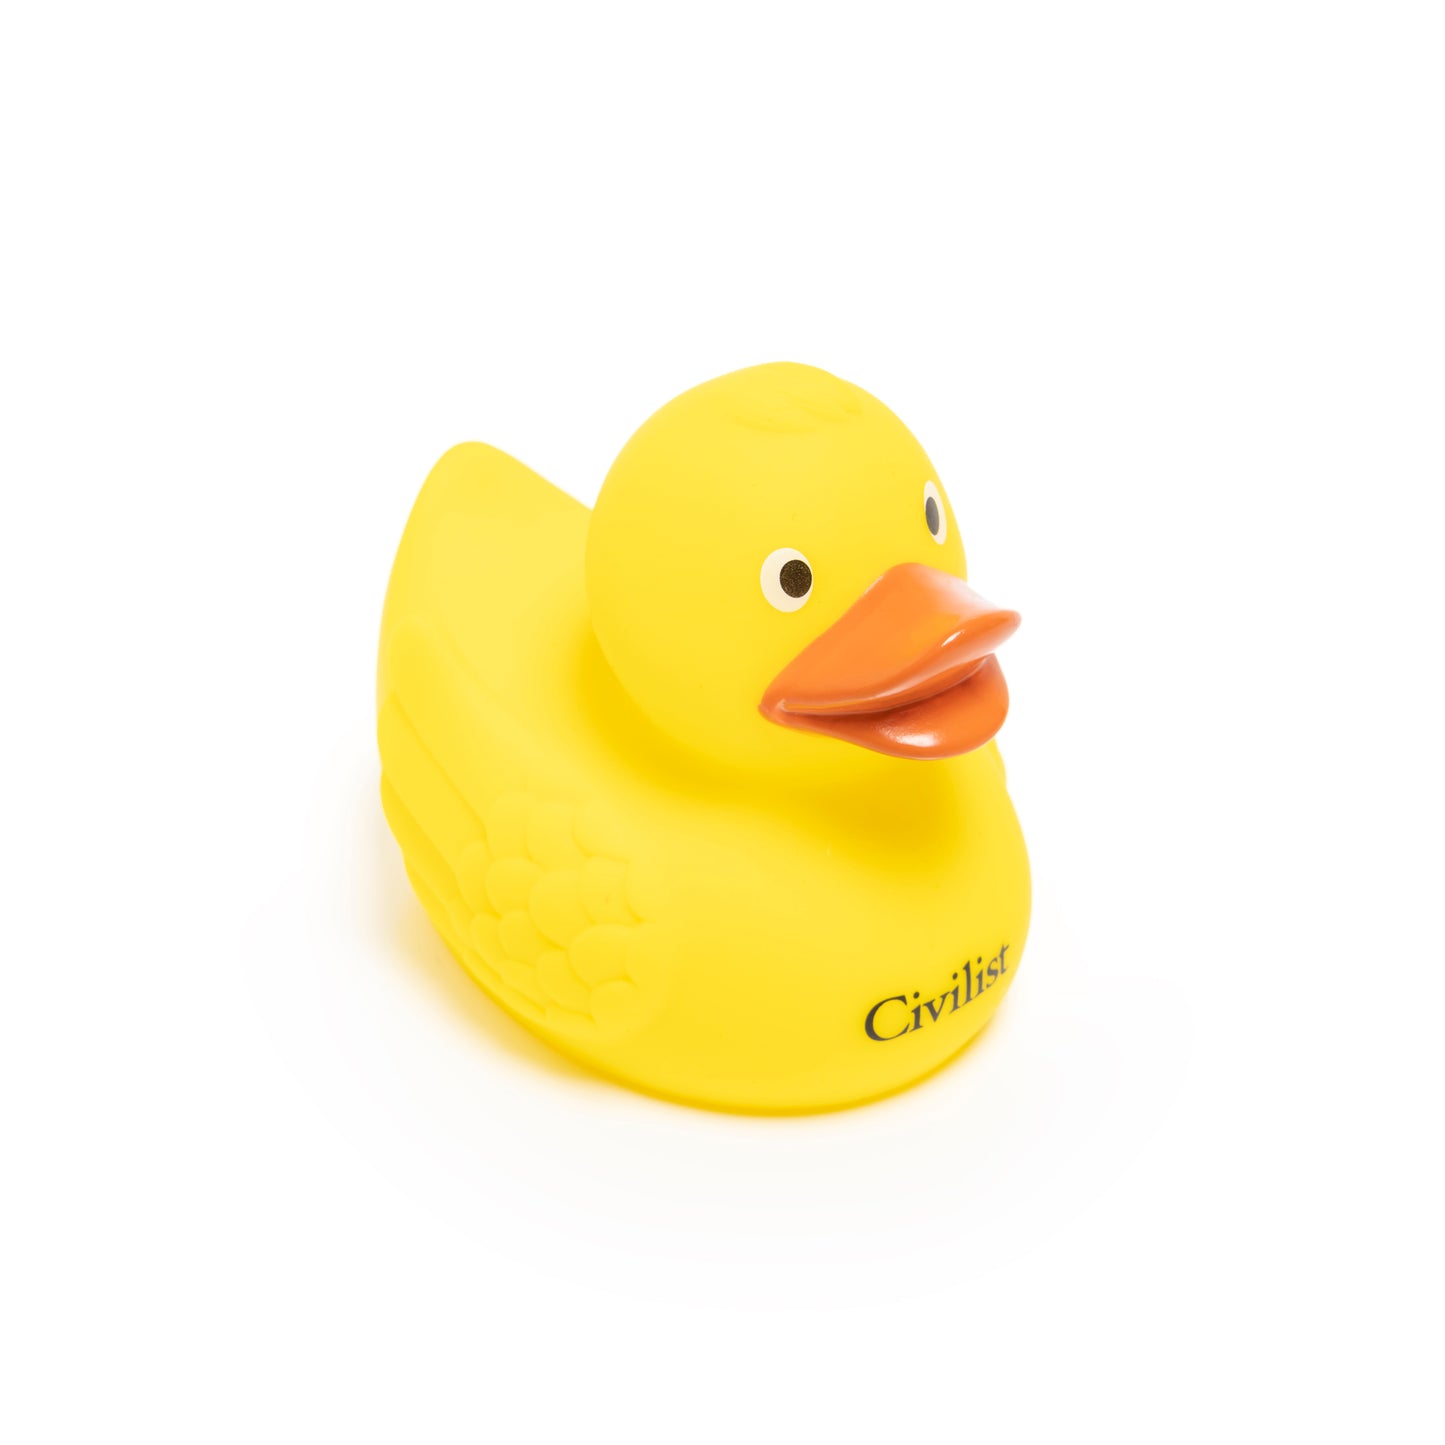 Rubber Duck - Yellow